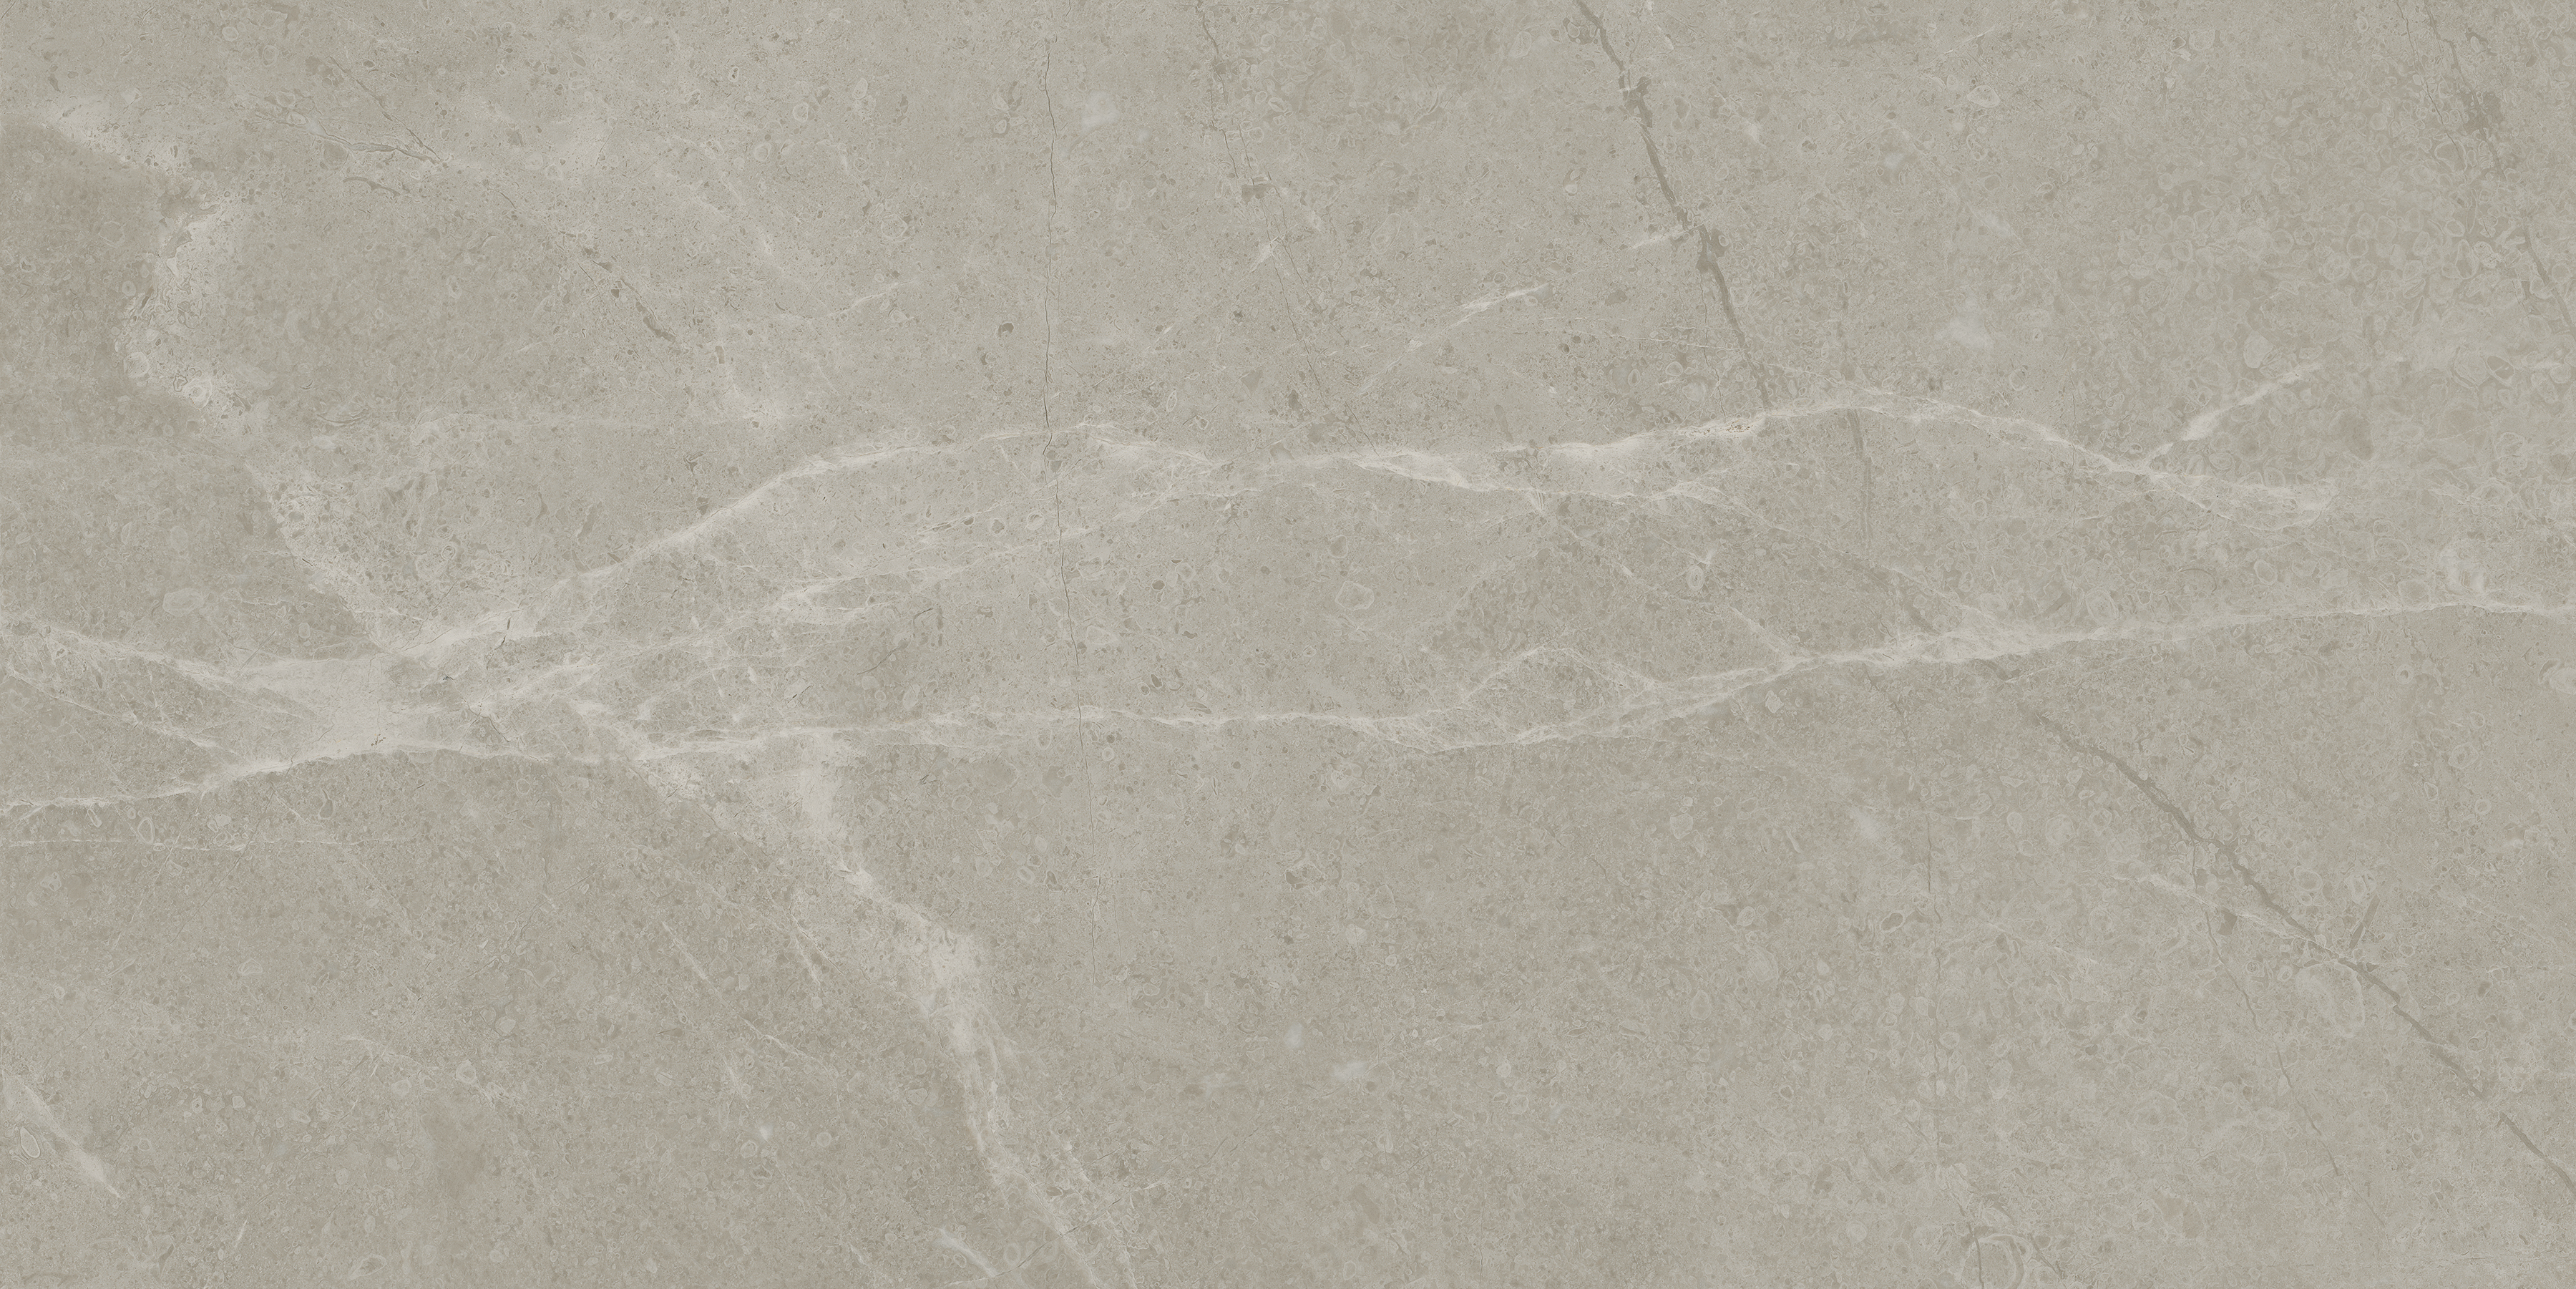 vanizio pattern glazed porcelain field tile from torino anatolia collection distributed by surface group international matte finish pressed edge 12x24 rectangle shape